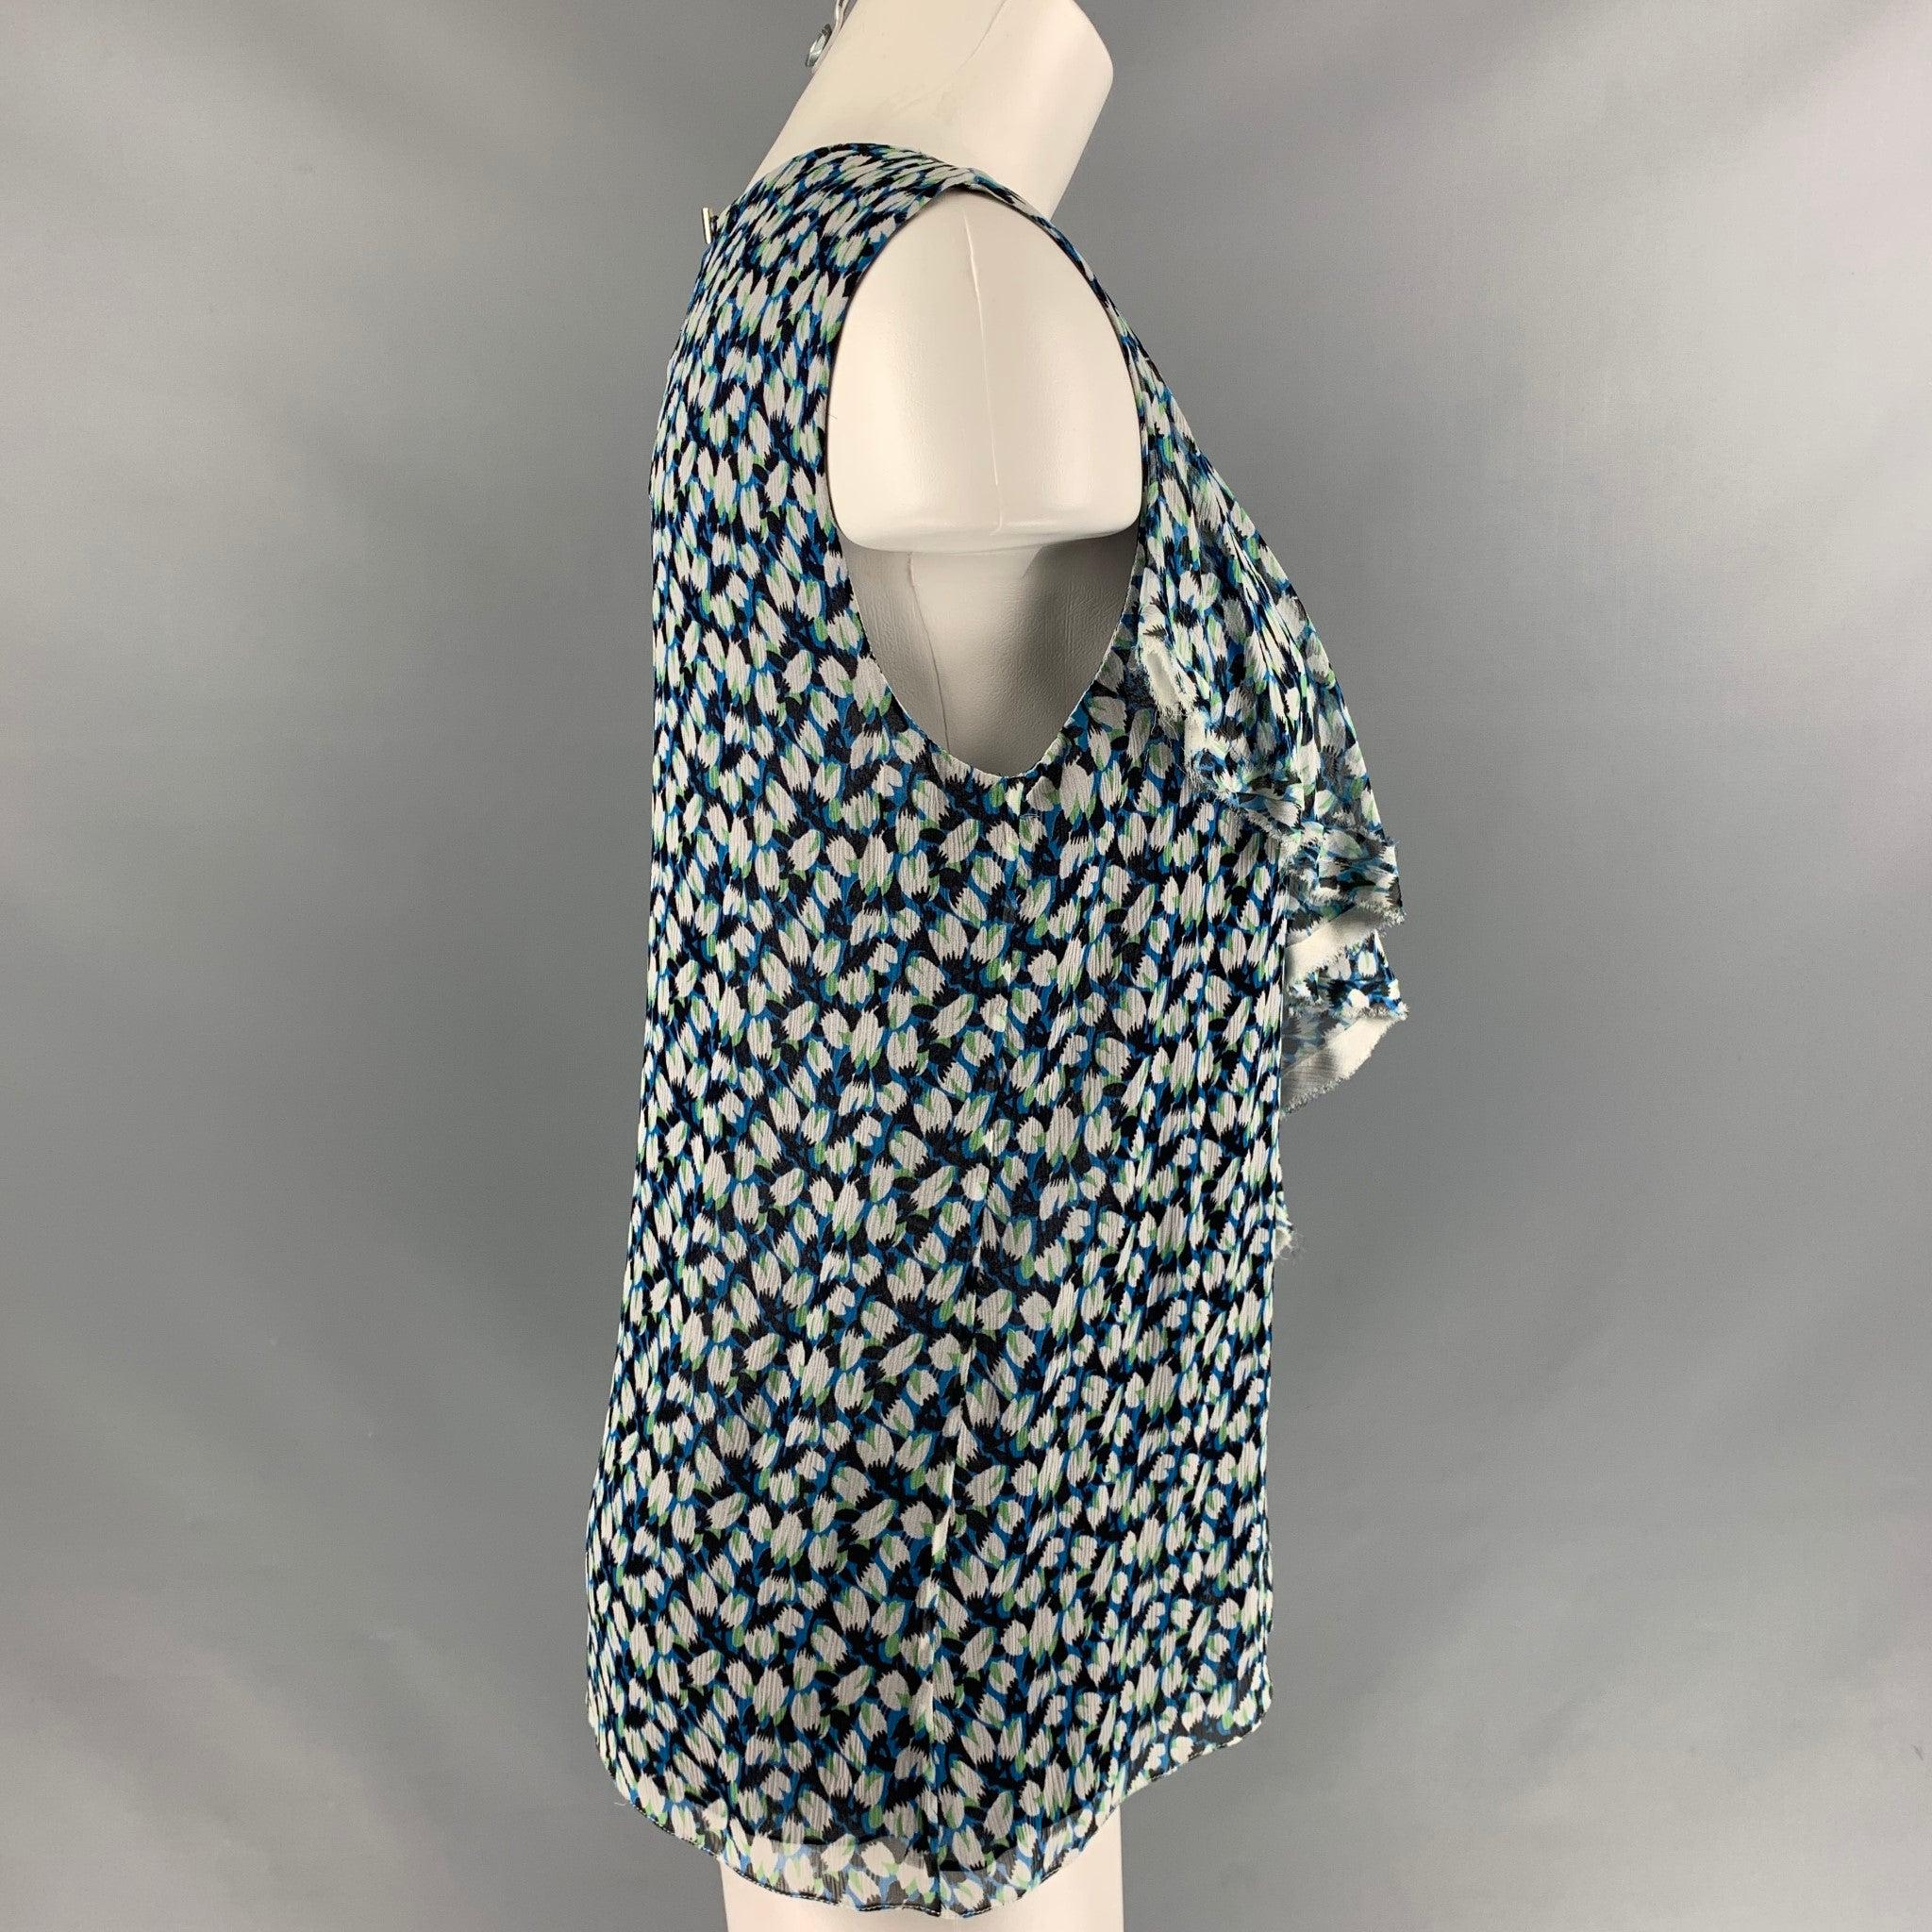 JASON WU sleeveless blouse comes in black, blue and white floral print silk chiffon fabric featuring an asymmetrical hem. Made in USA.Excellent Pre-Owned Condition. 

Marked:   6 

Measurements: 
 
Shoulder: 14 inches Bust: 39 inches Length: 25.5